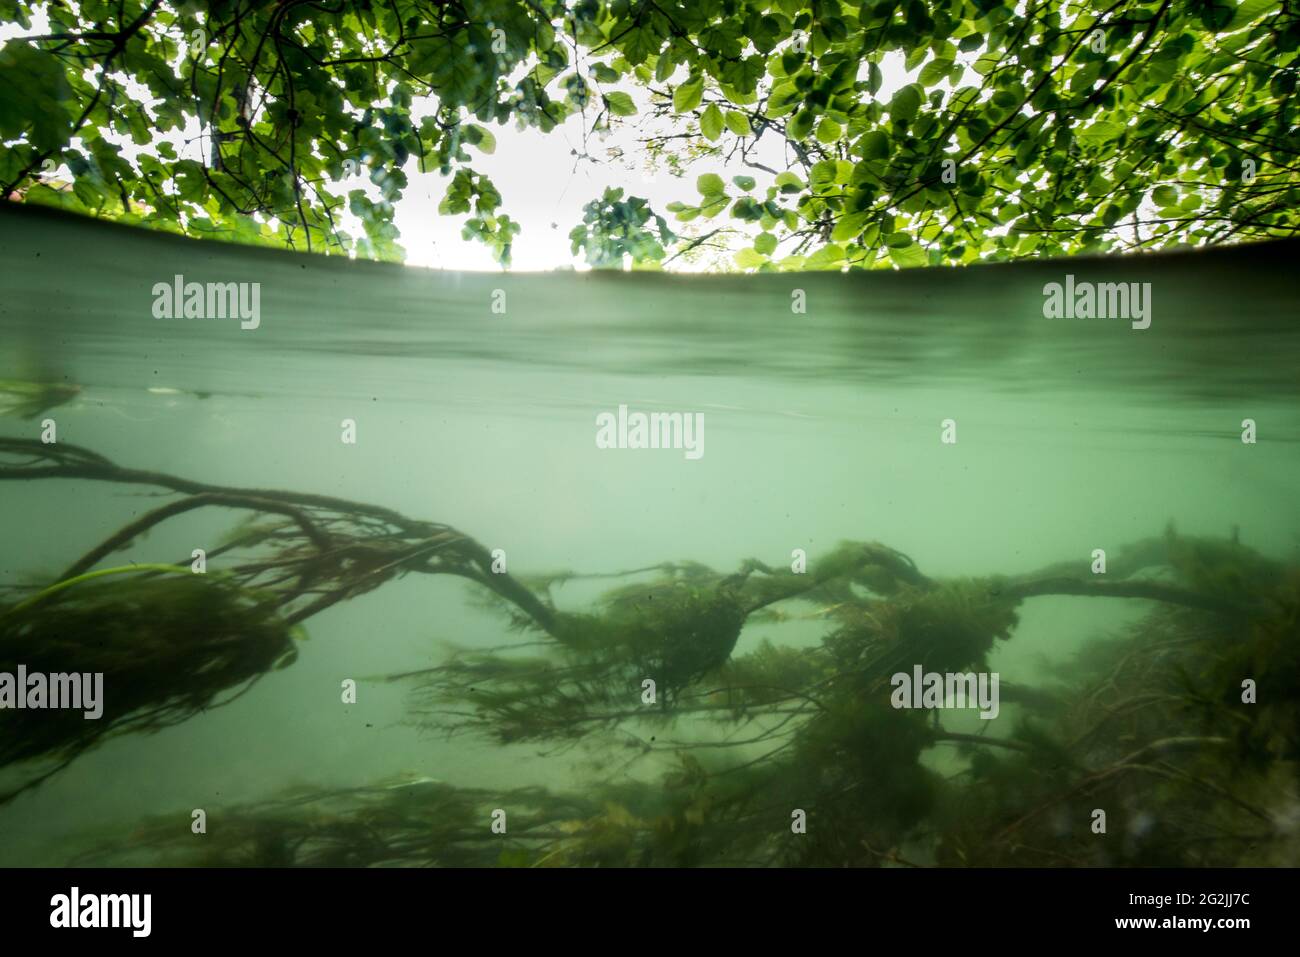 Swamp landscape under and over water Stock Photo